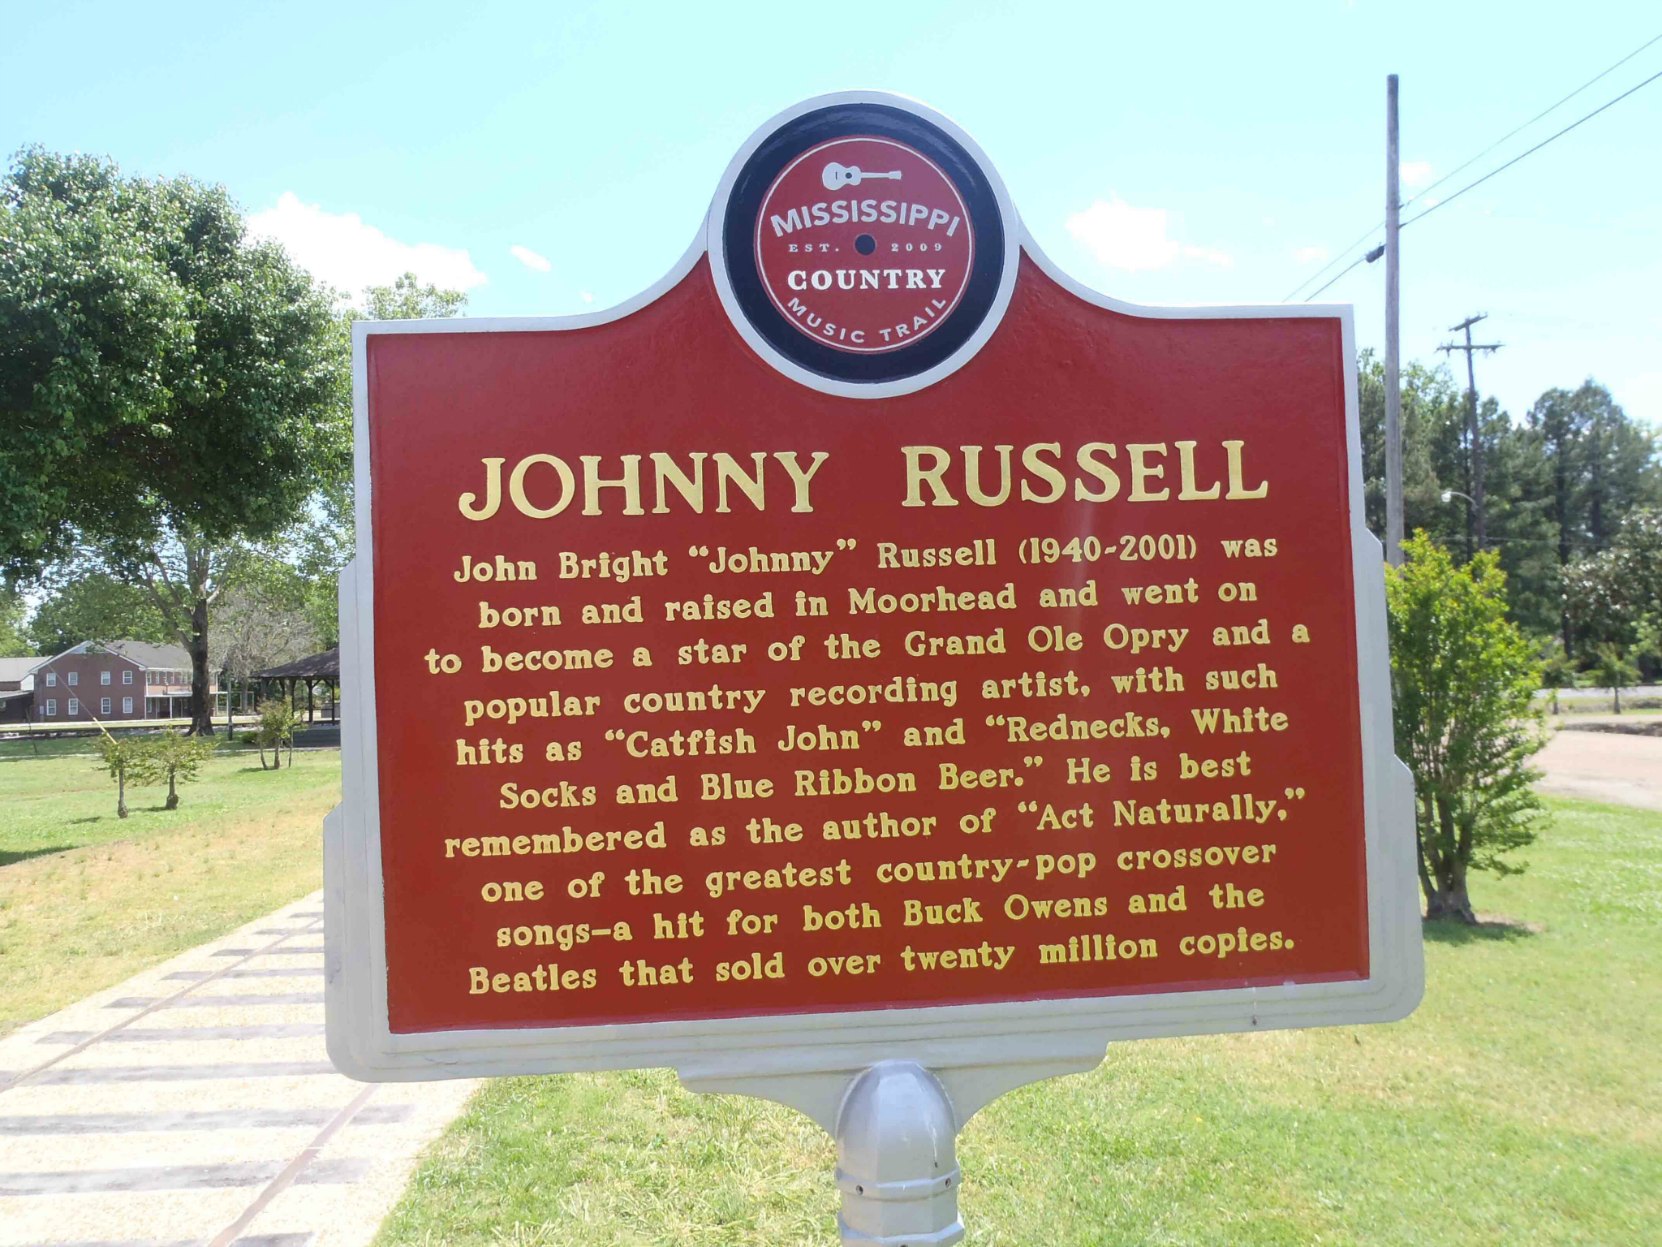 Mississippi Country Music Trail marker commemorating Johnny Russell, Moorhead, Mississippi